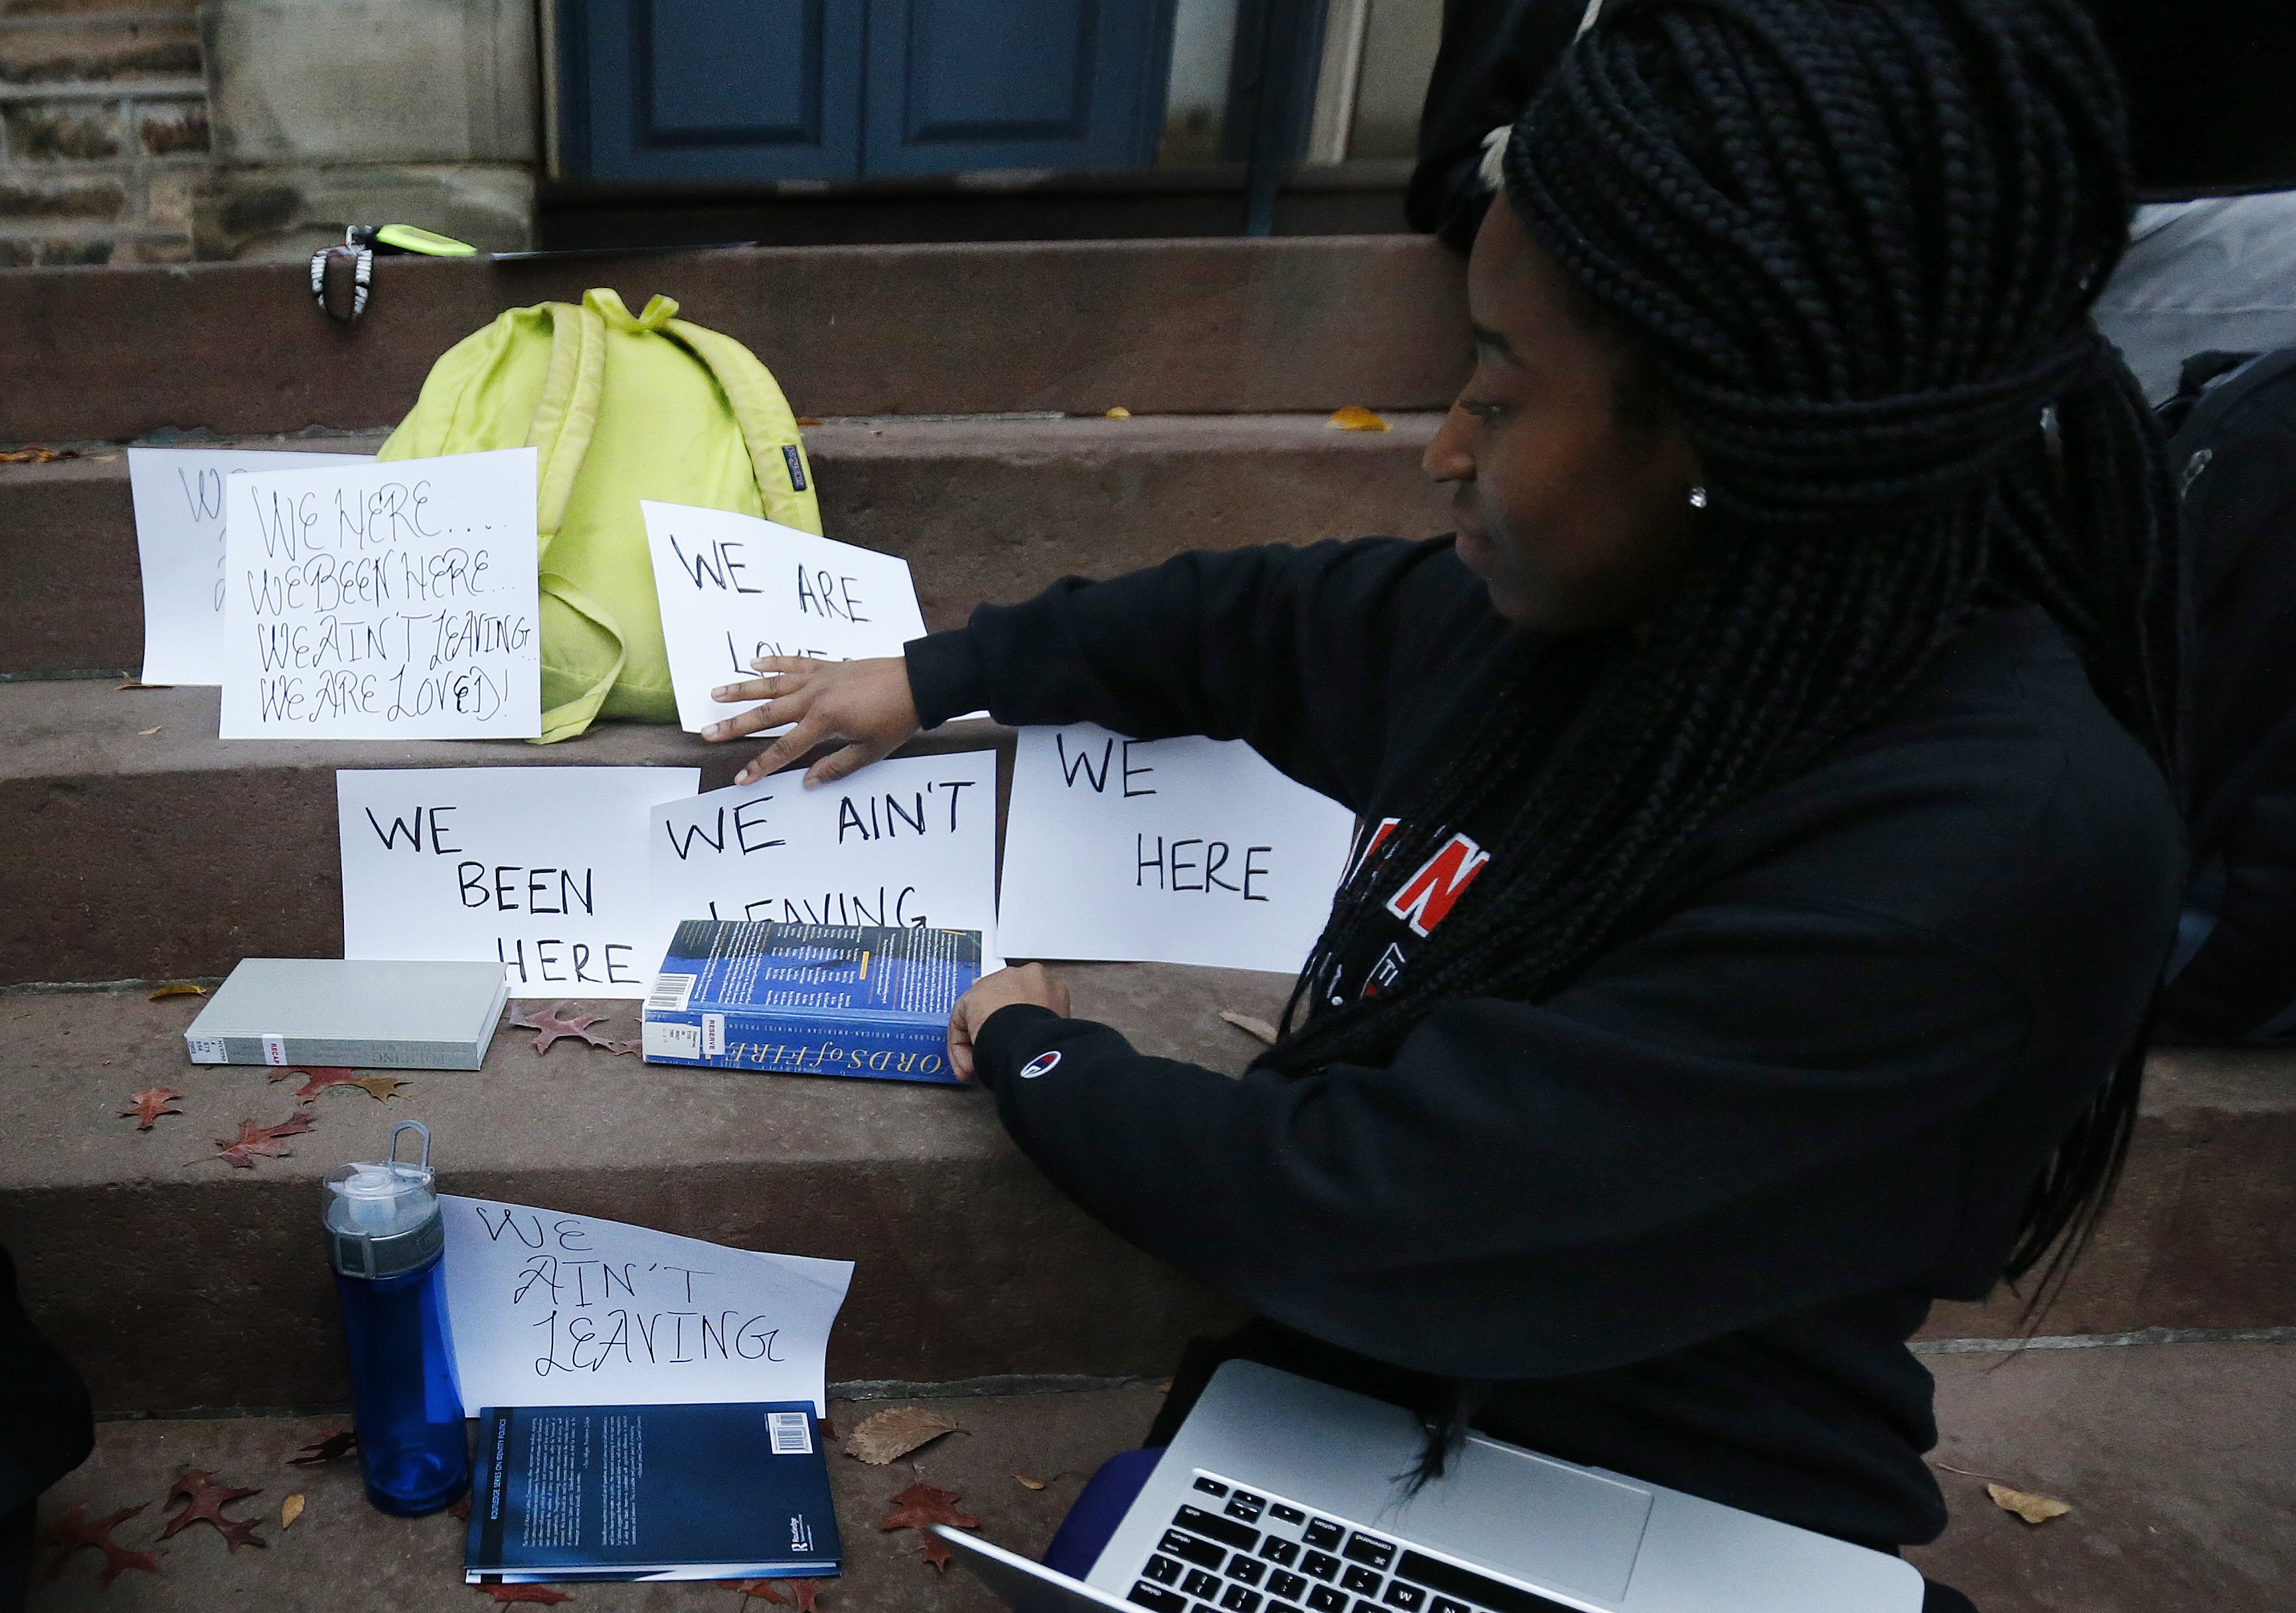 A student shows signs made for a sit-in to demand changes to improve the social and academic experience of black students, at Princeton University in Princeton, N.J. on Nov. 18, 2015. (Julio Cortez—AP)